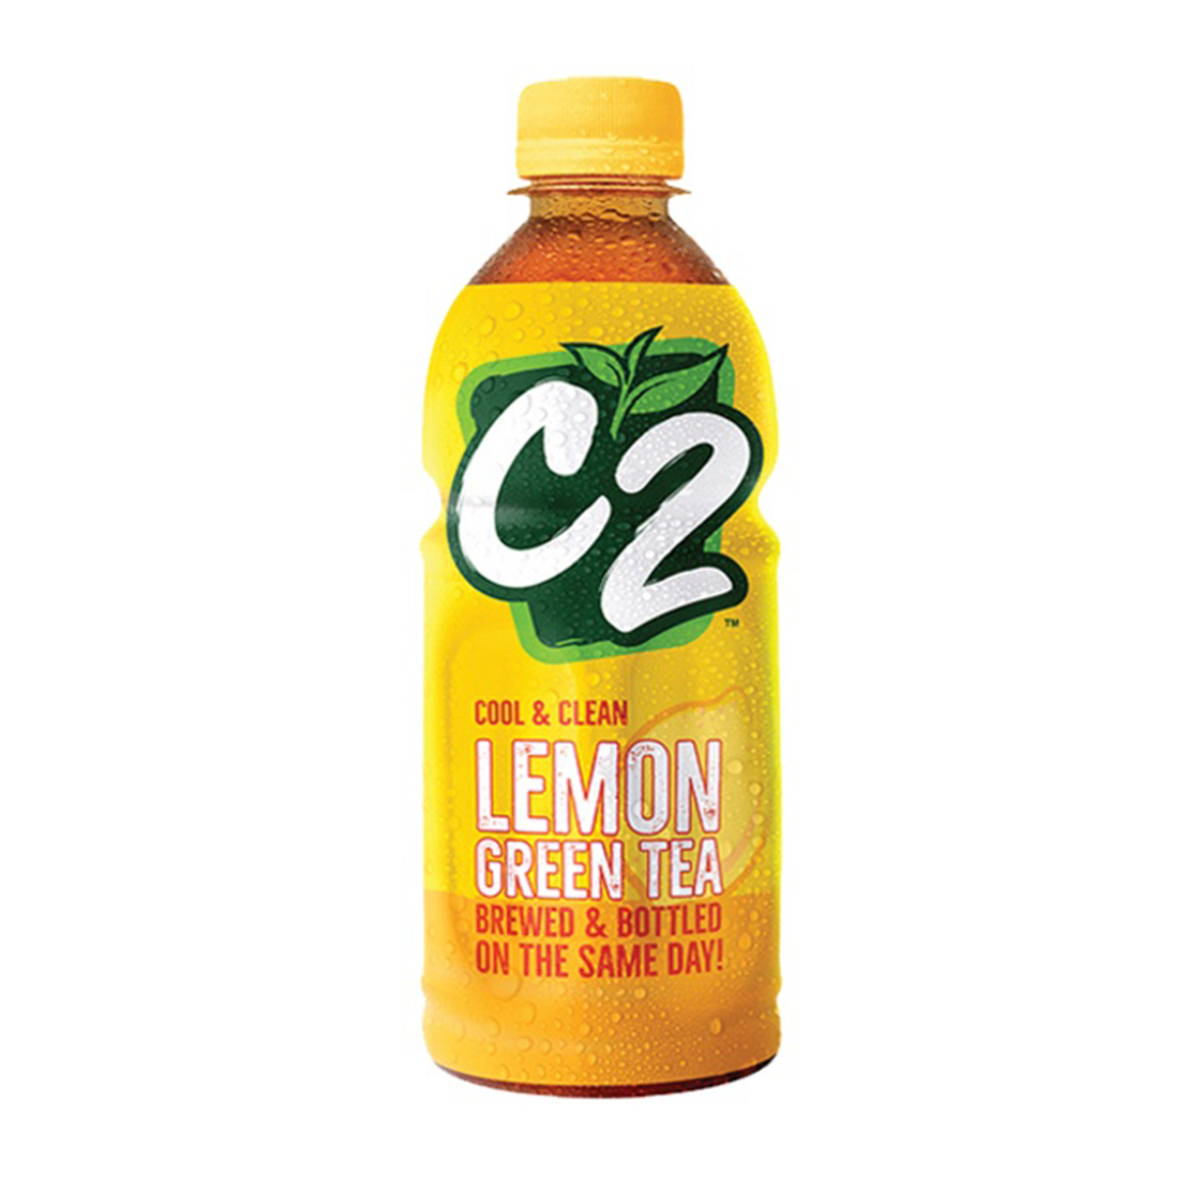 Green Tea Drink Lemon Flavour 500ml by C2 Cool & Clean C2 Cool & Clean You  may also receive a special surprise if you purchase now